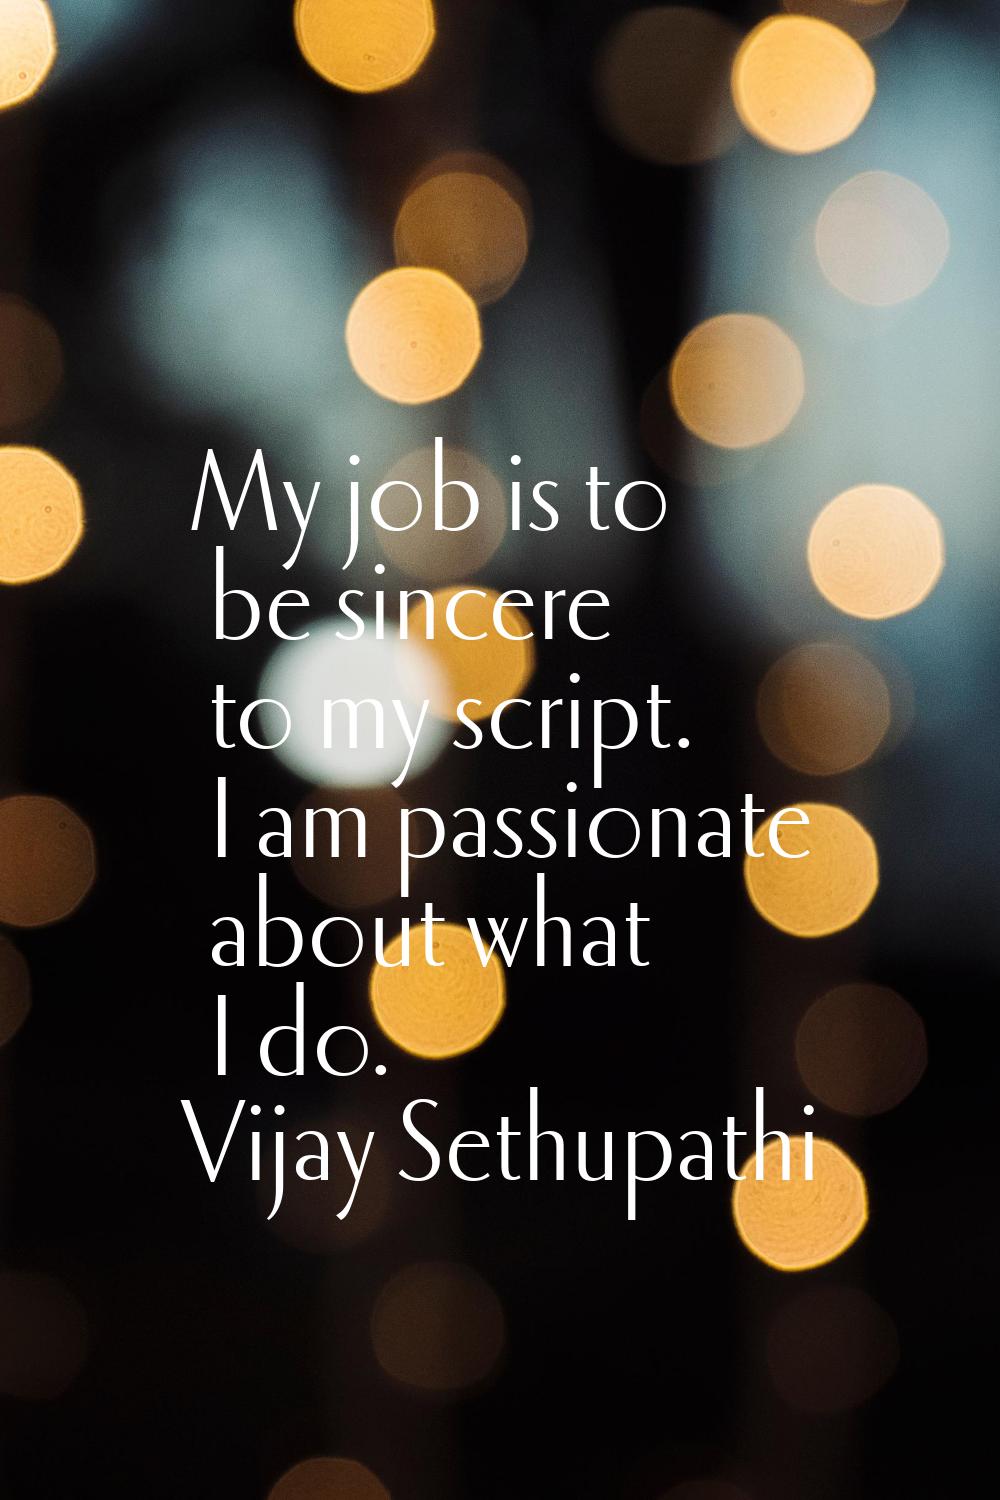 My job is to be sincere to my script. I am passionate about what I do.